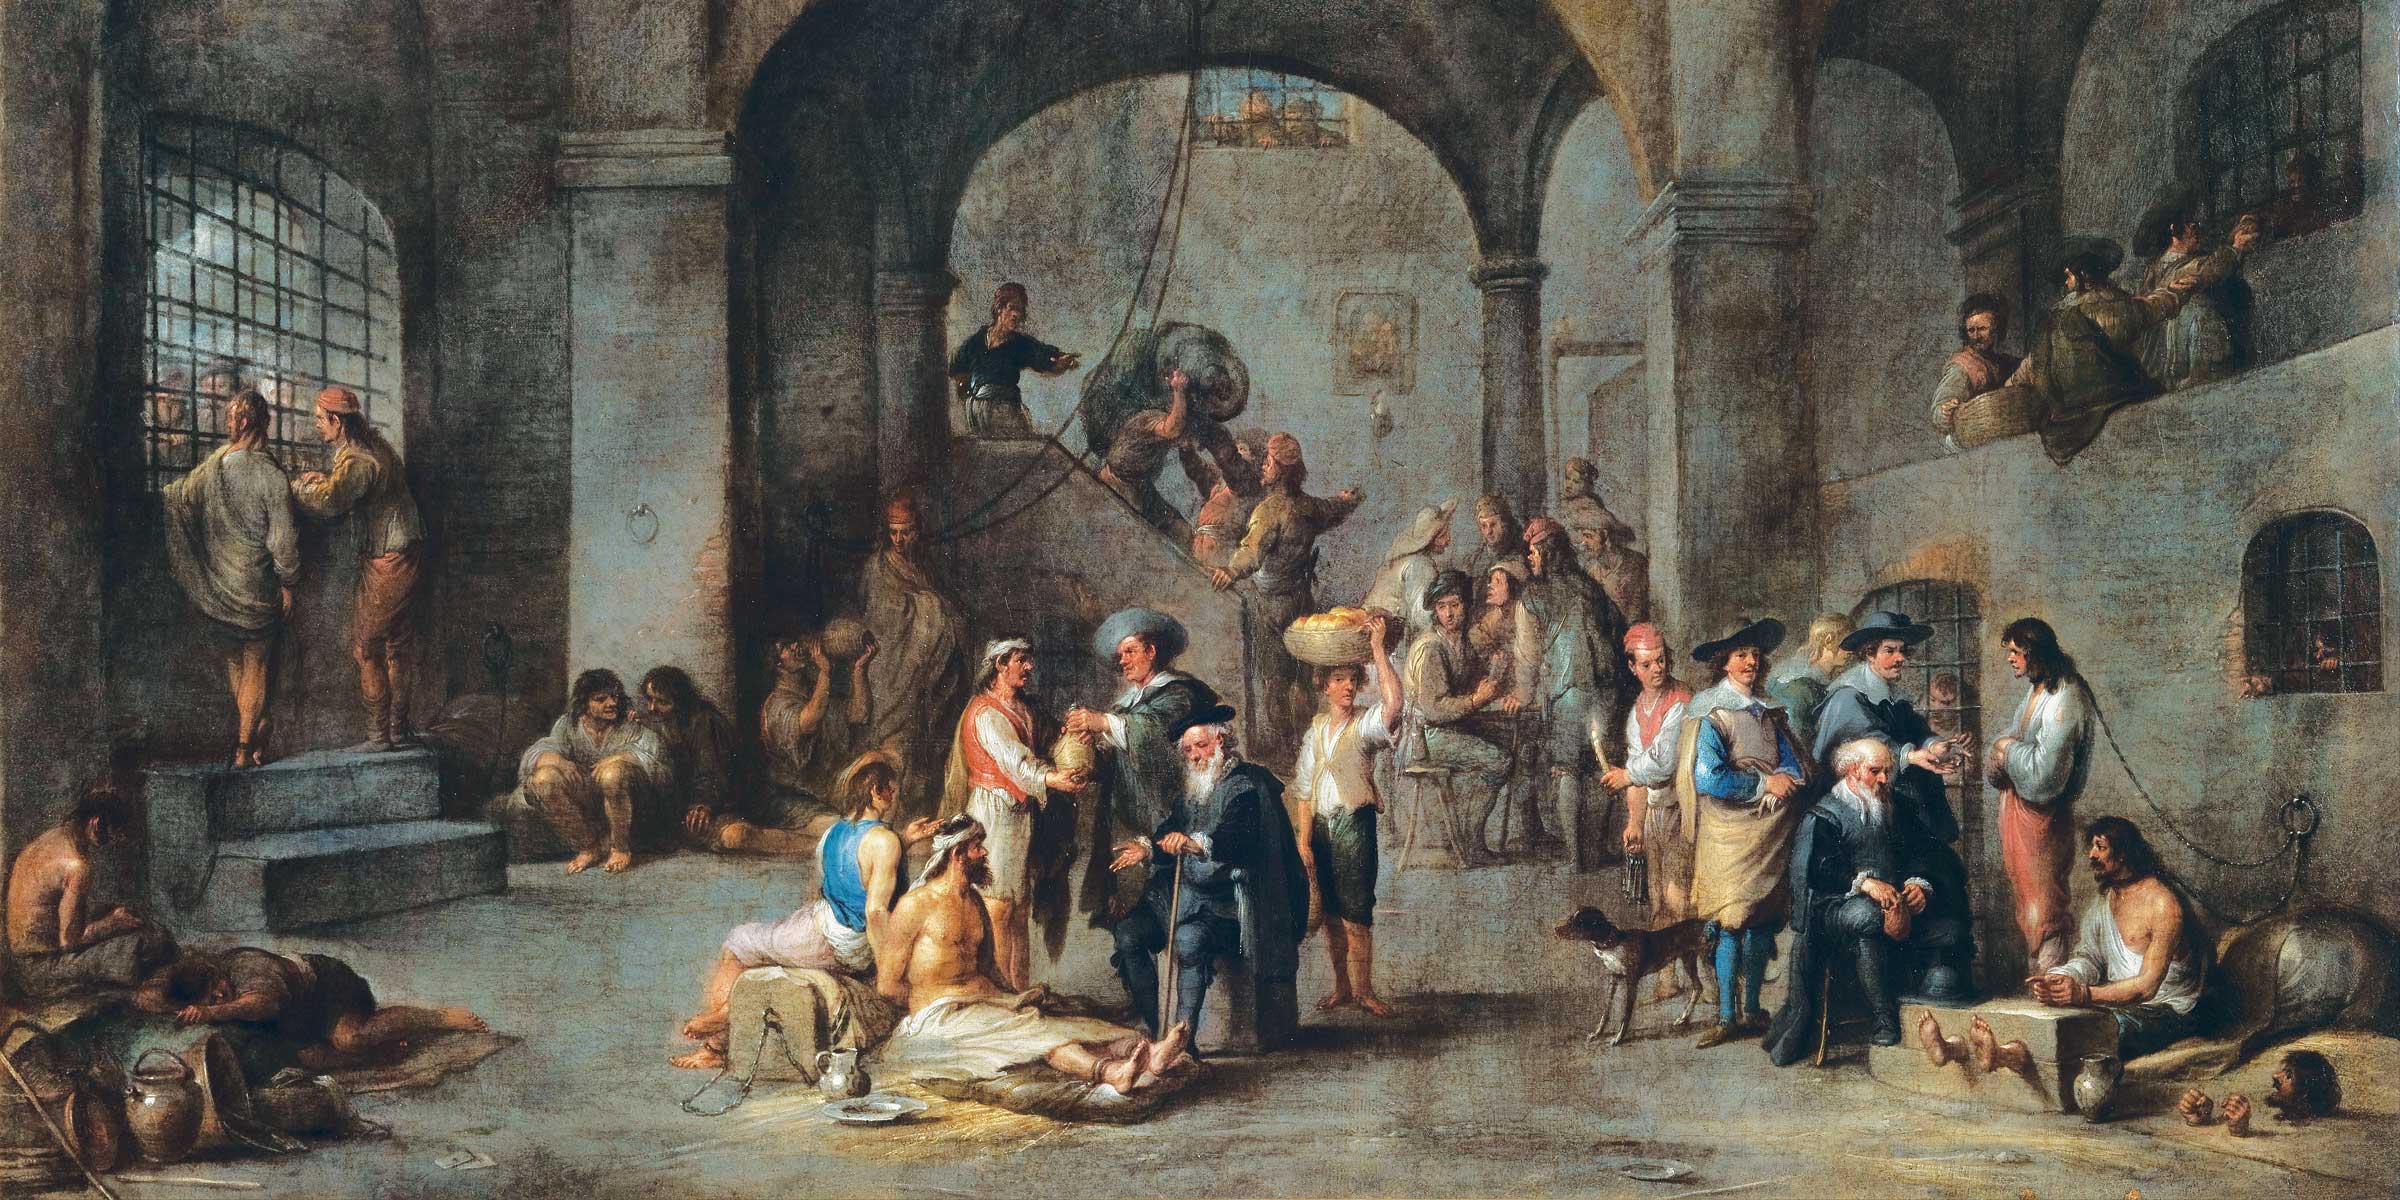 Group of men, including a man handing another a jug, inside a stone prison.